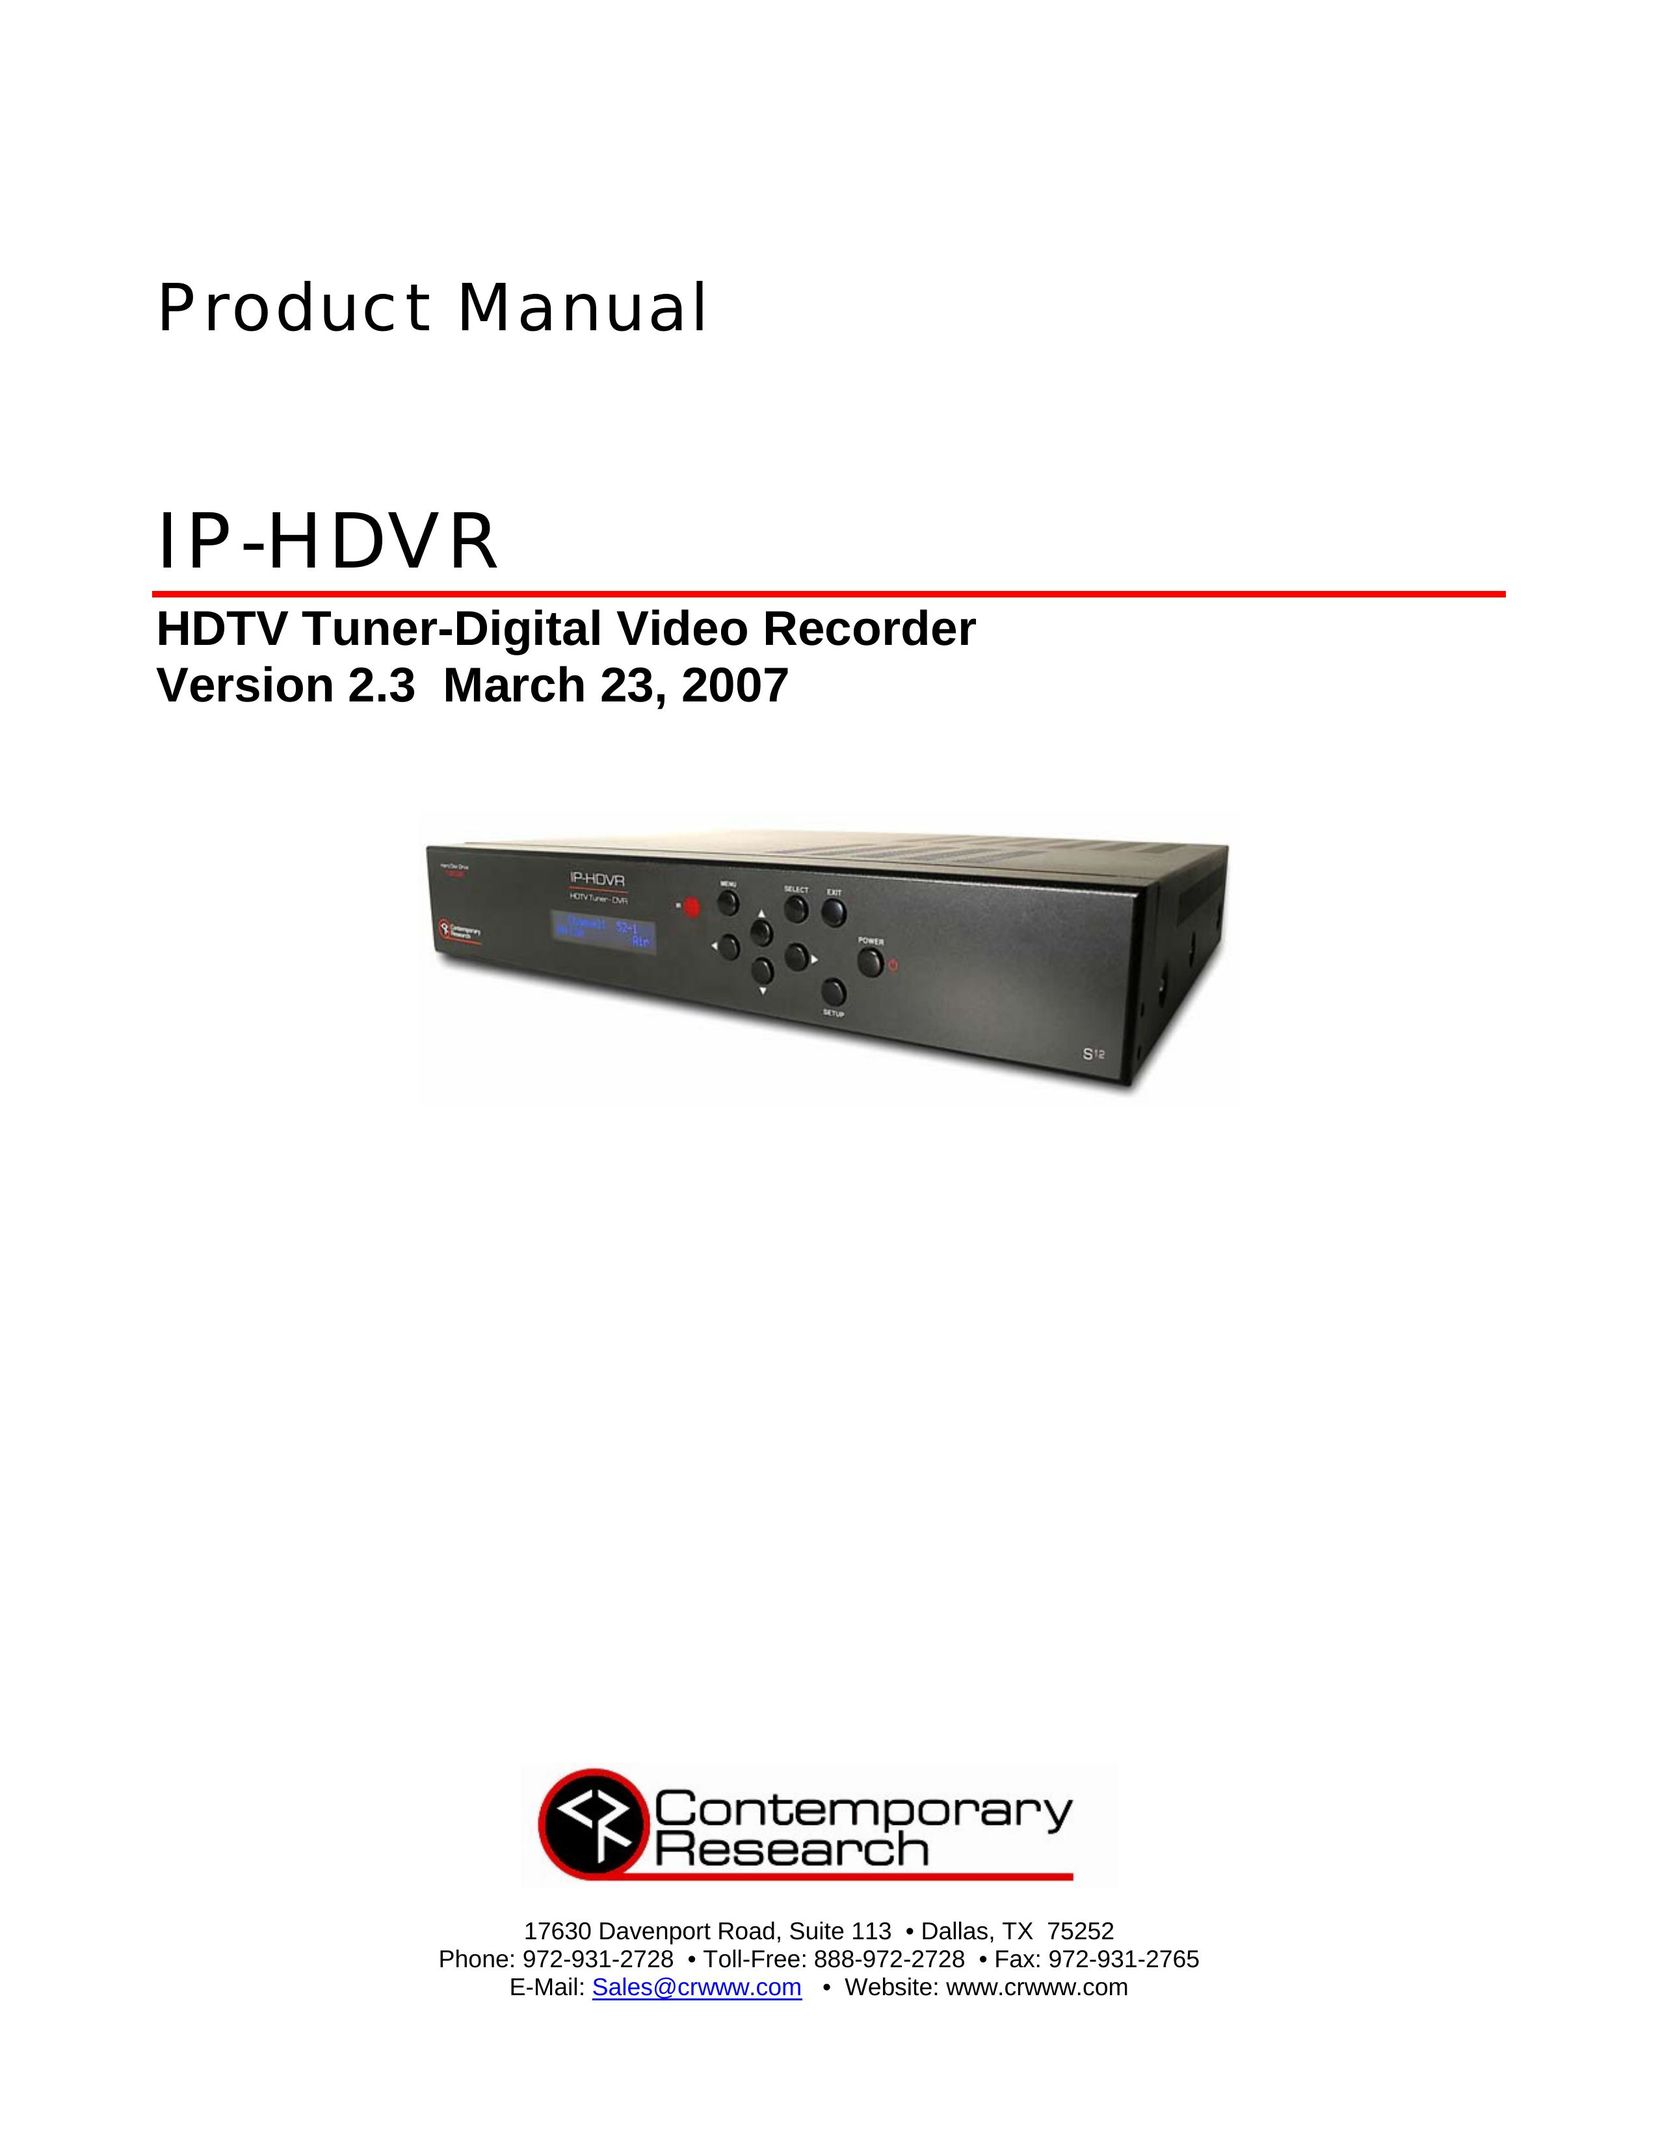 Contemporary Research IP-HDVR TV Receiver User Manual